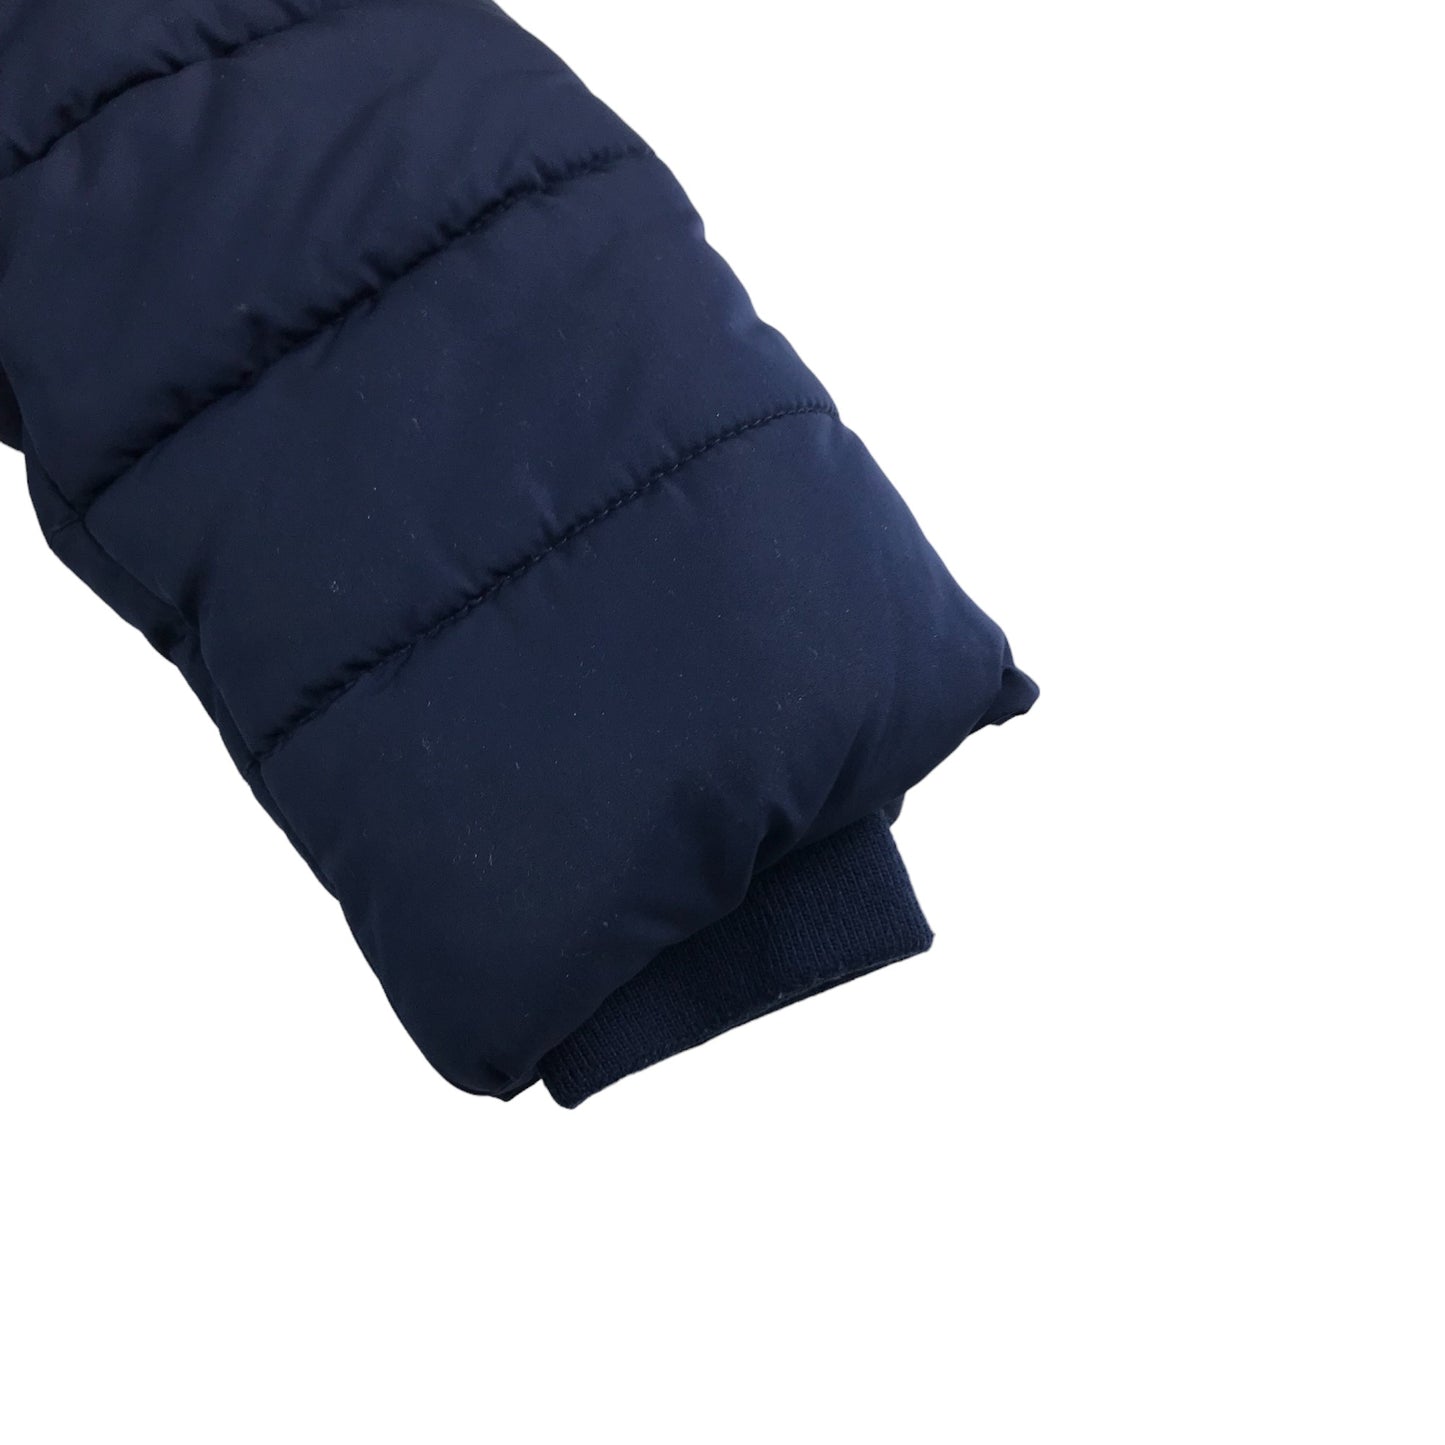 George Jacket Age 5 Navy Blue Parka Faux Fur lining with Hood